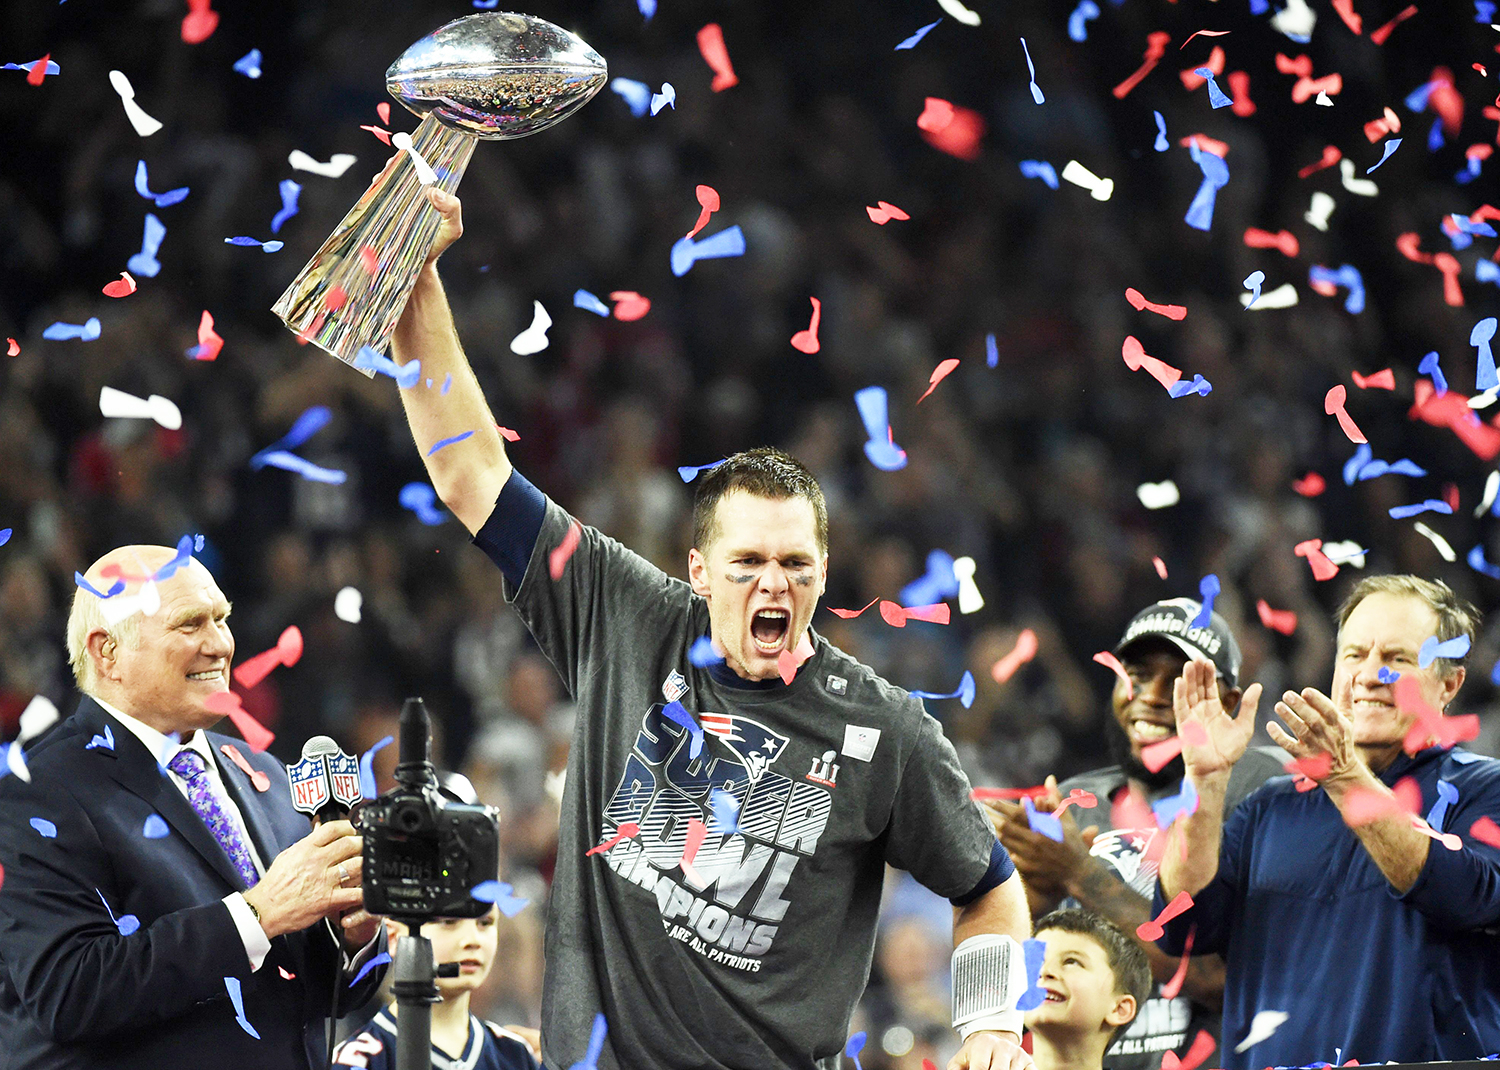 who won the superbowl last year